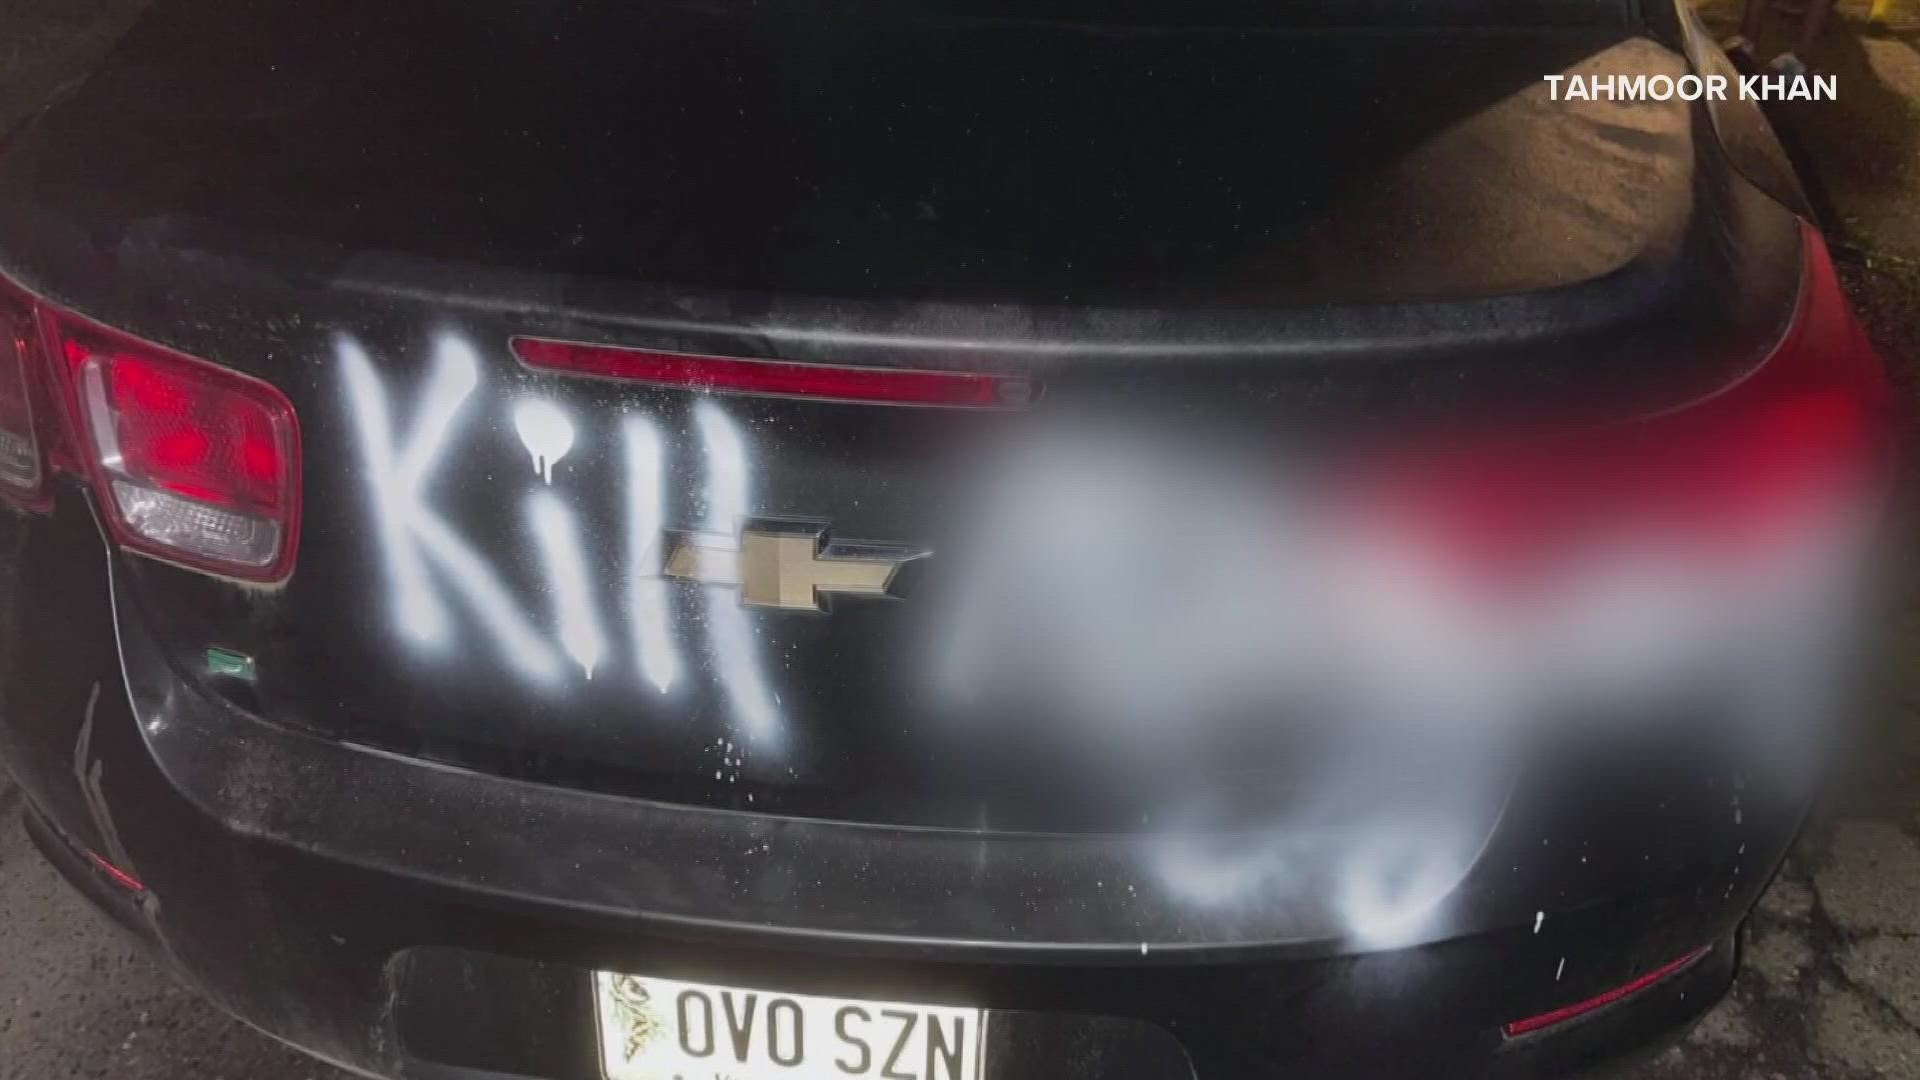 The two 15-year-olds allegedly spray-painted racial slurs and threats on Tahmoor Khan's car in Bangor last month.